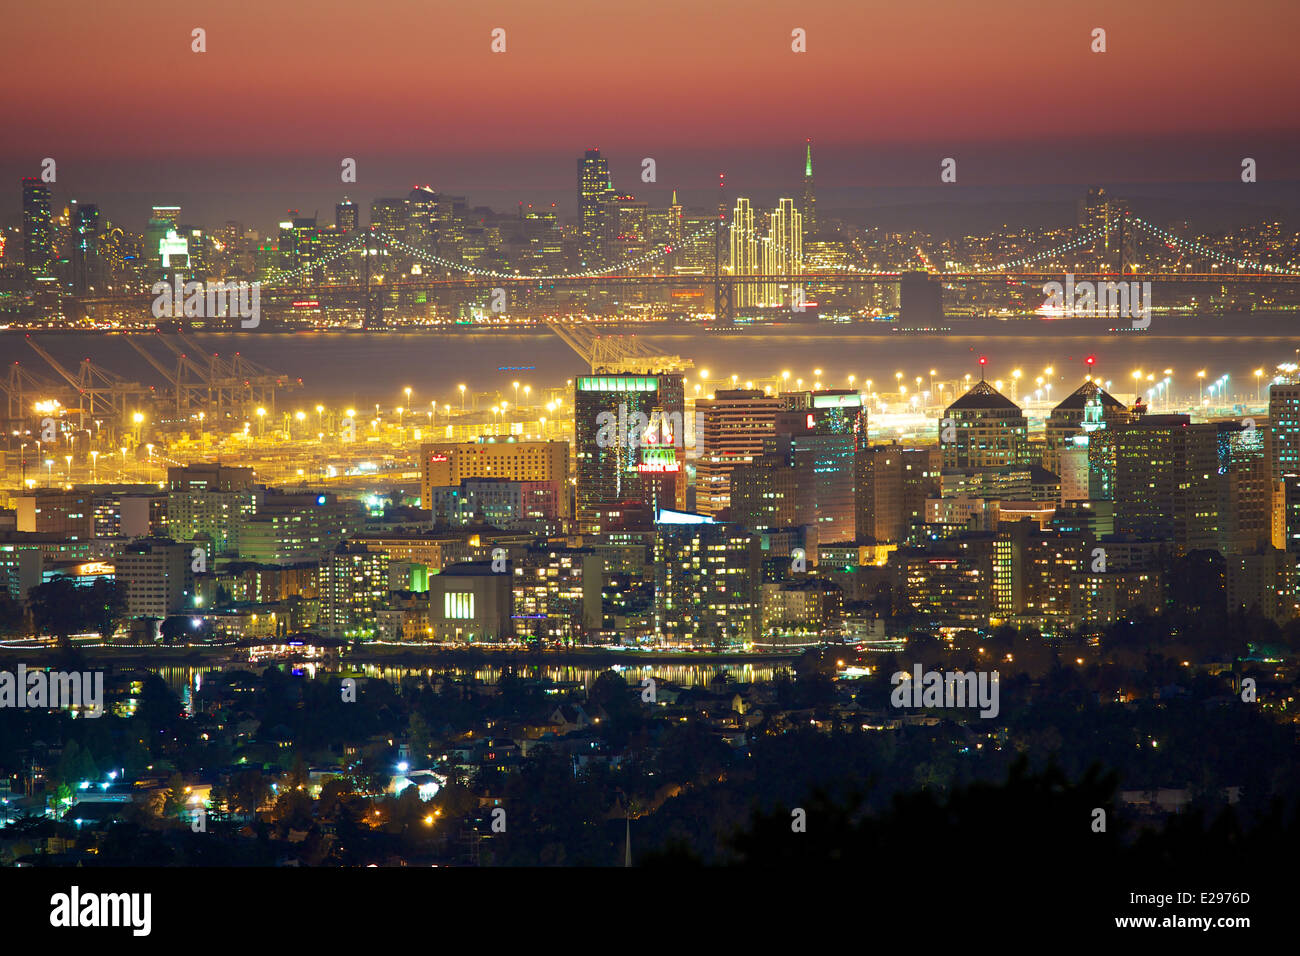 A rare view of the Oakland and San Francisco skylines at night along with the Bay Bridge Stock Photo